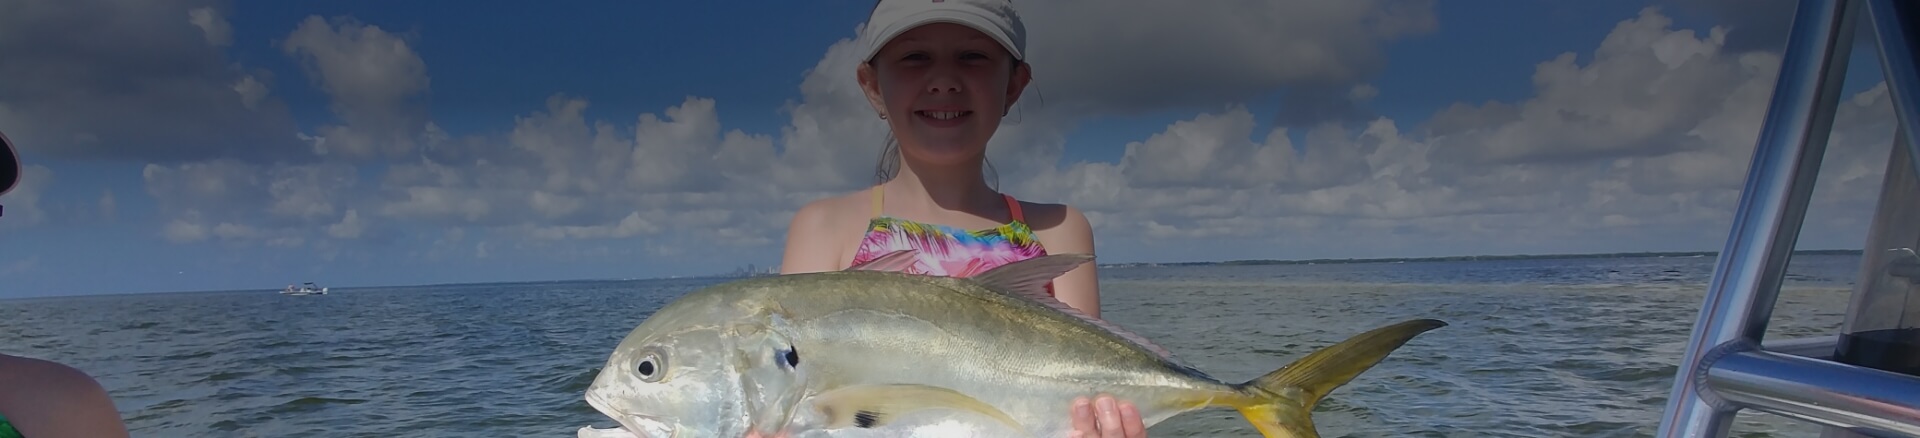 Child holding a fish caught in Tampa Bay Florida